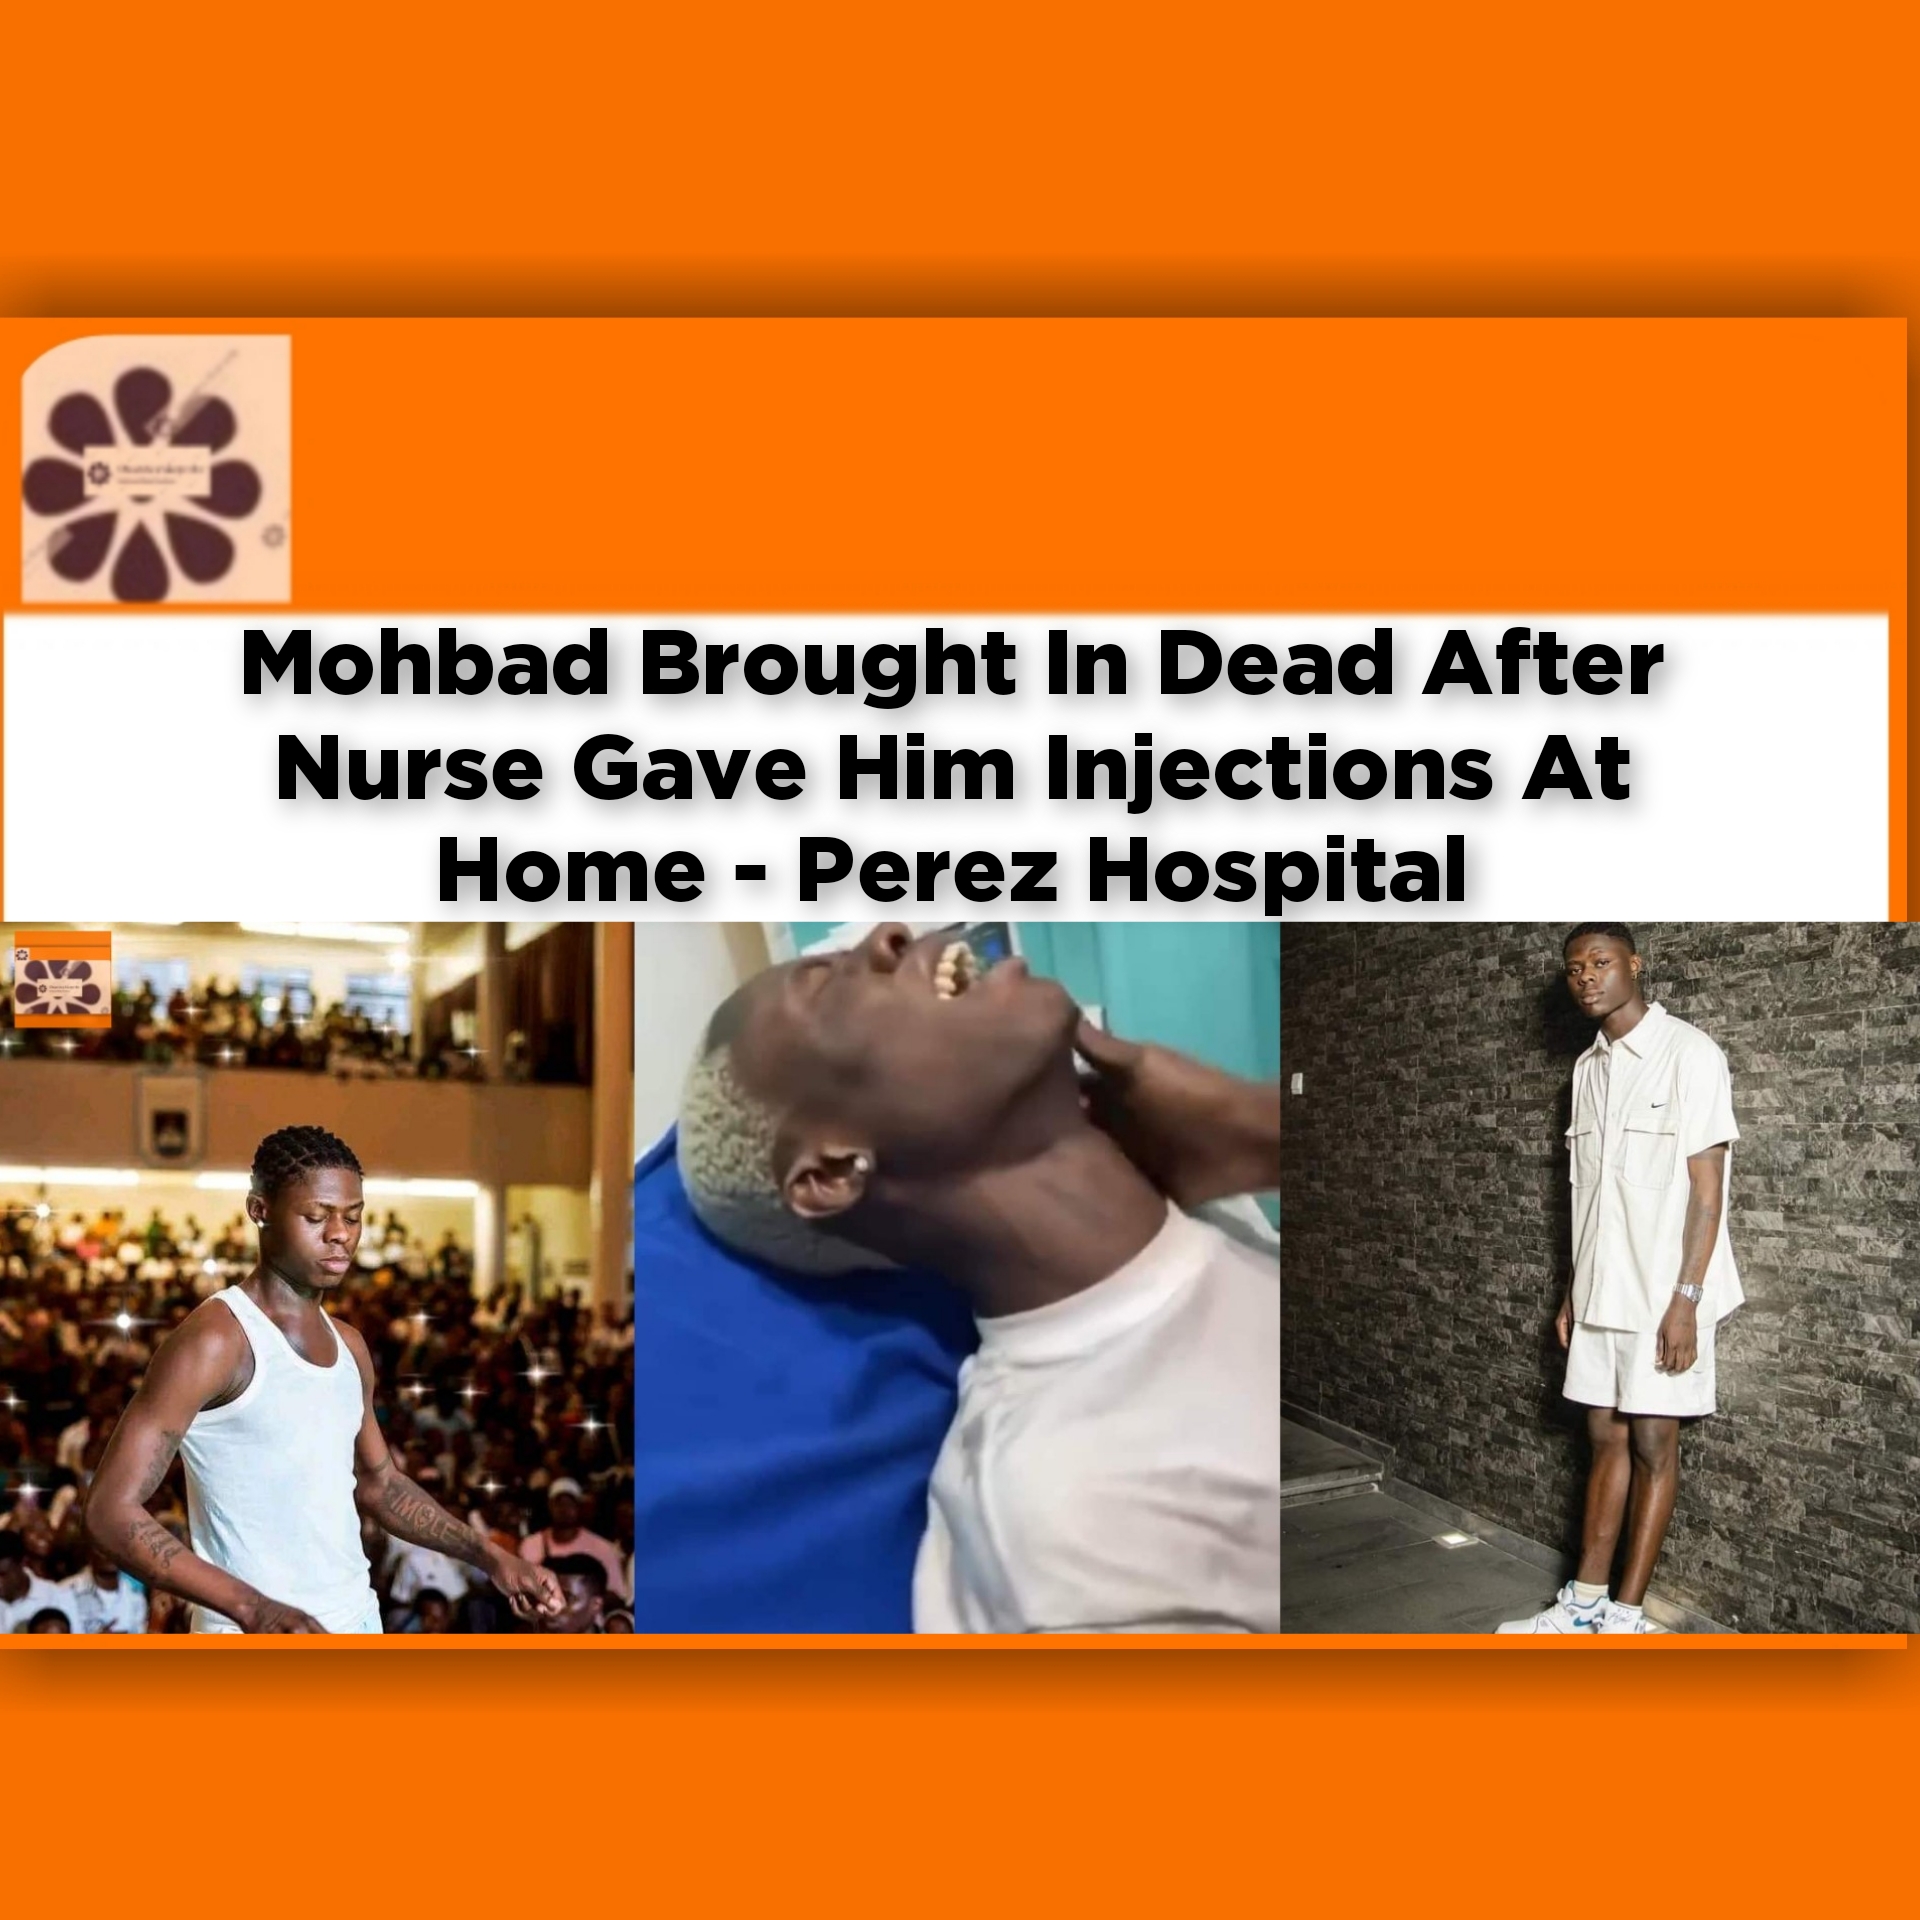 Mohbad Brought In Dead After Nurse Gave Him Injections At Home - Perez Hospital ~ OsazuwaAkonedo #Unknown